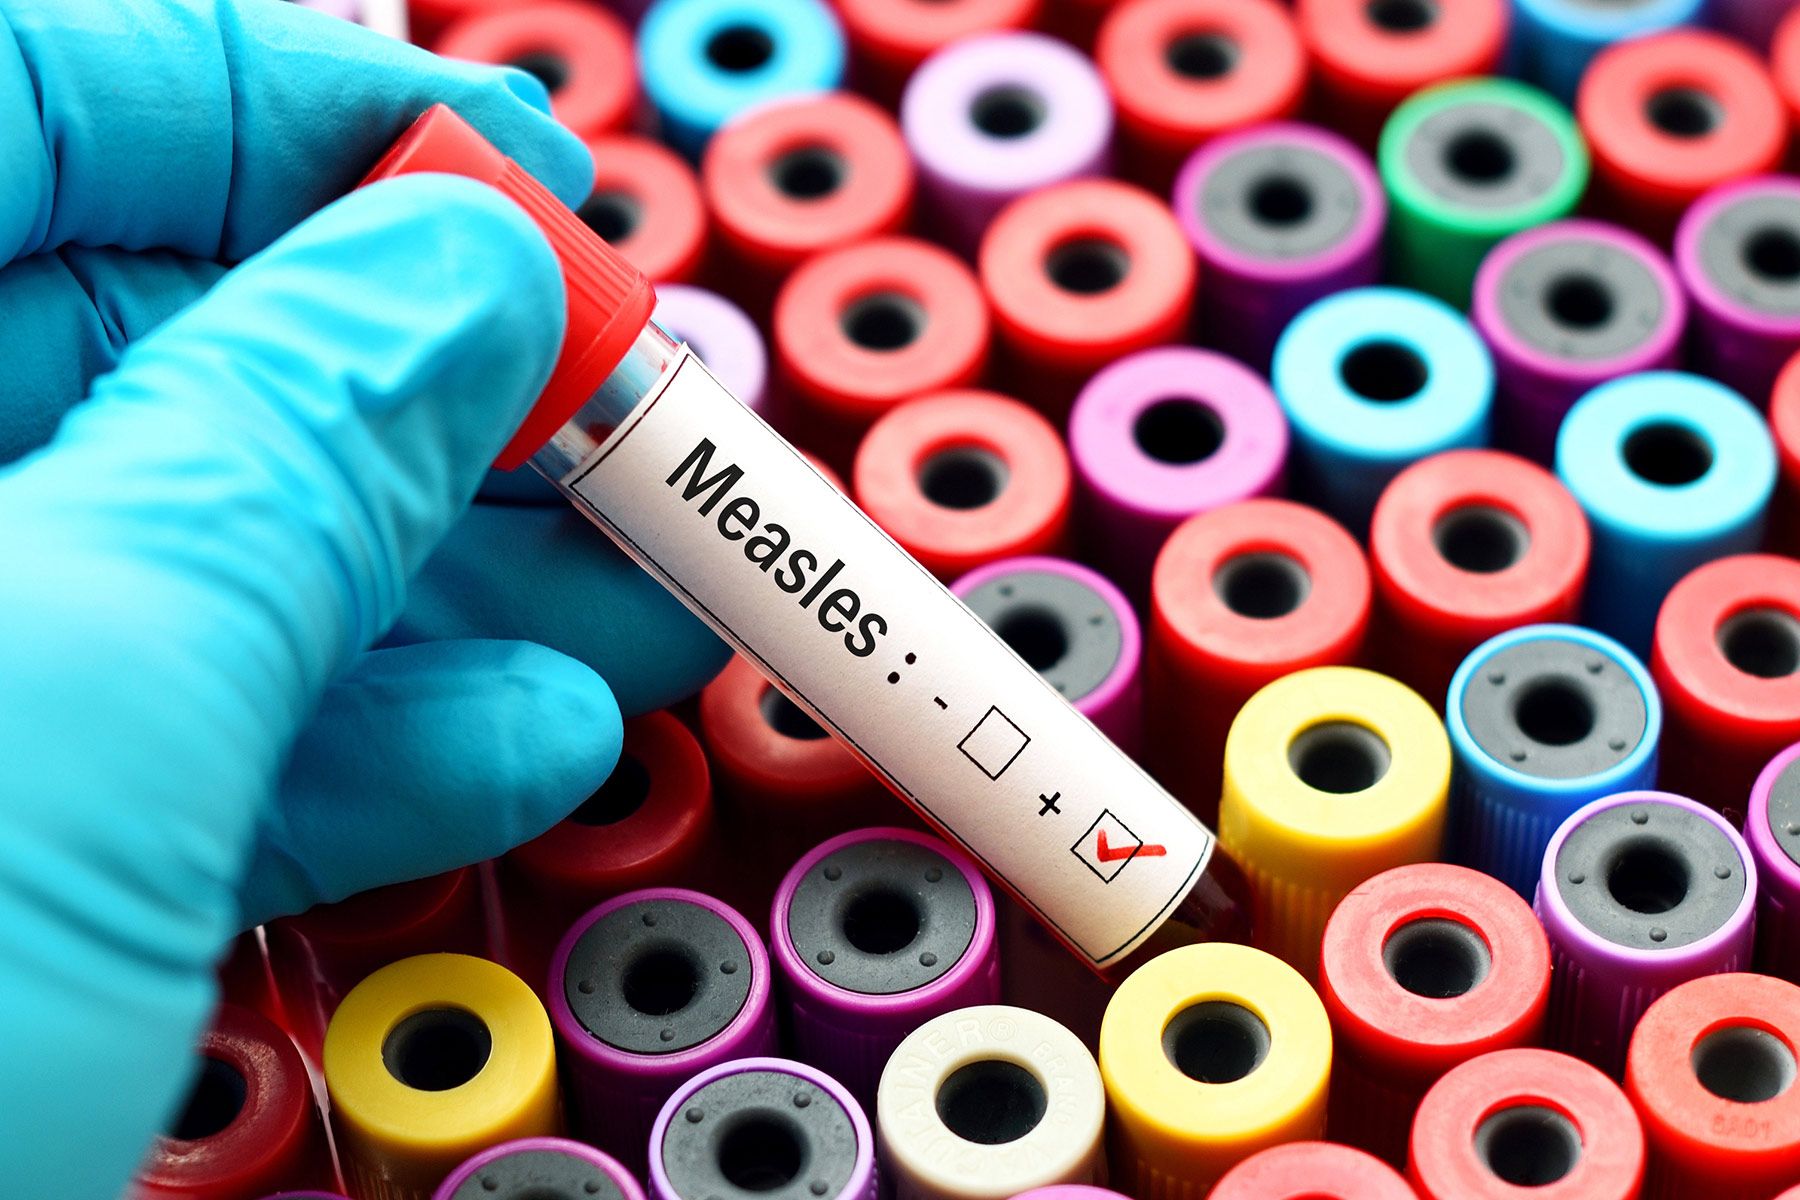 WHO, CDC Warn of Measles Threat